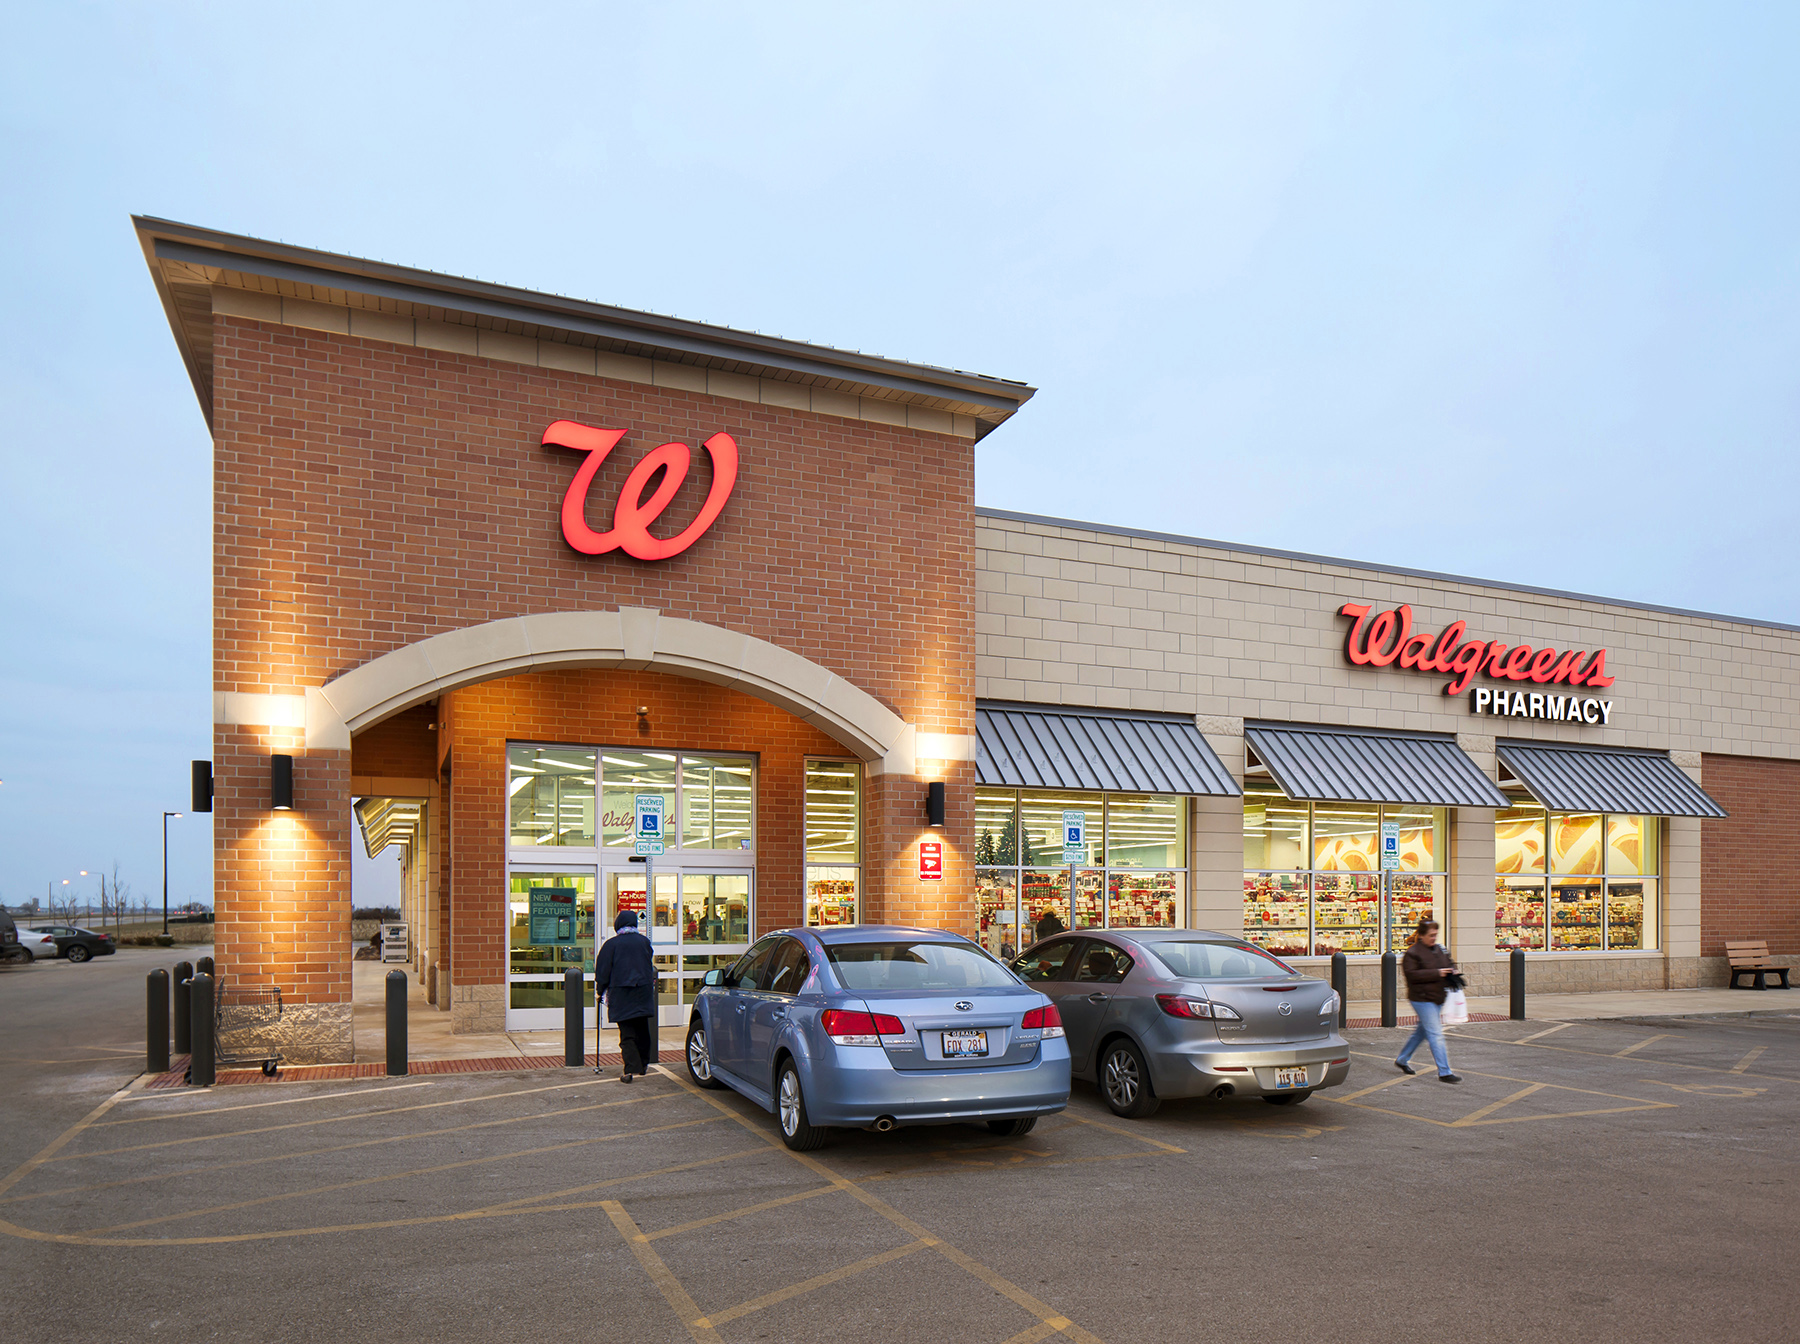 Hanley Investment Group Arranges Sales of Three Single-Tenant Walgreens for $22.6 Million to Three Buyers in 25 Days